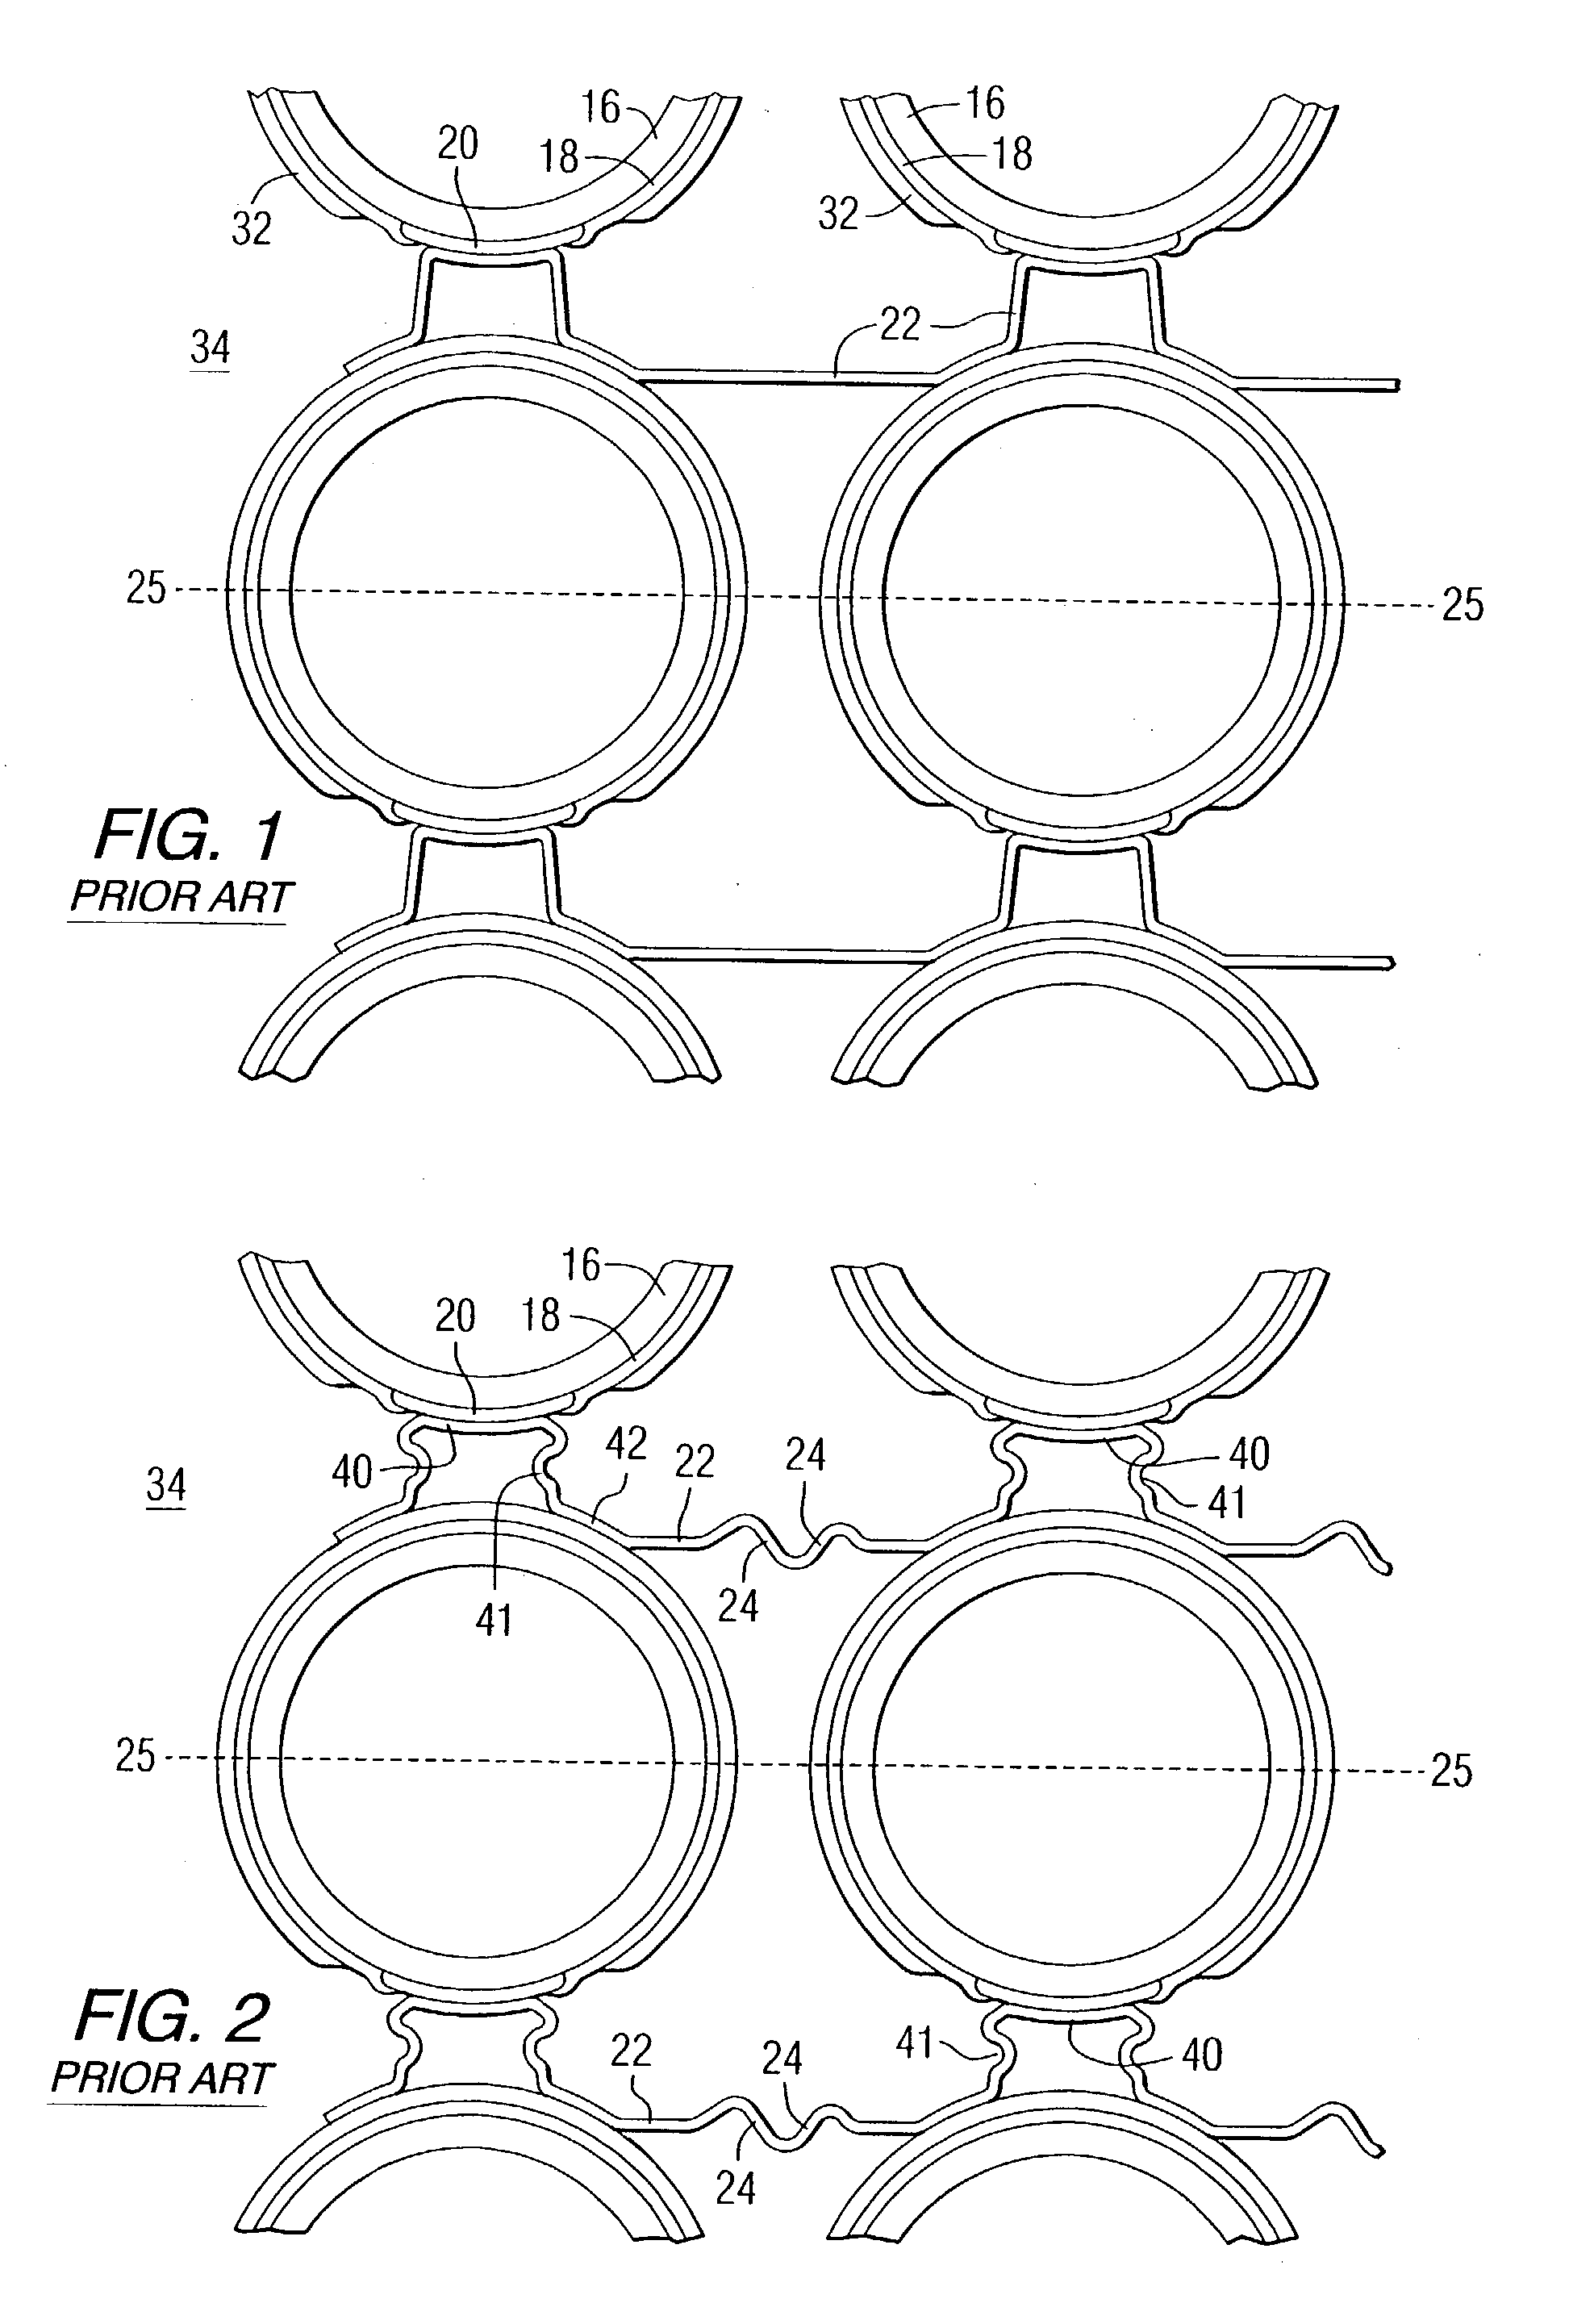 Combination nickel foam expanded nickel screen electrical connection supports for solid oxide fuel cells